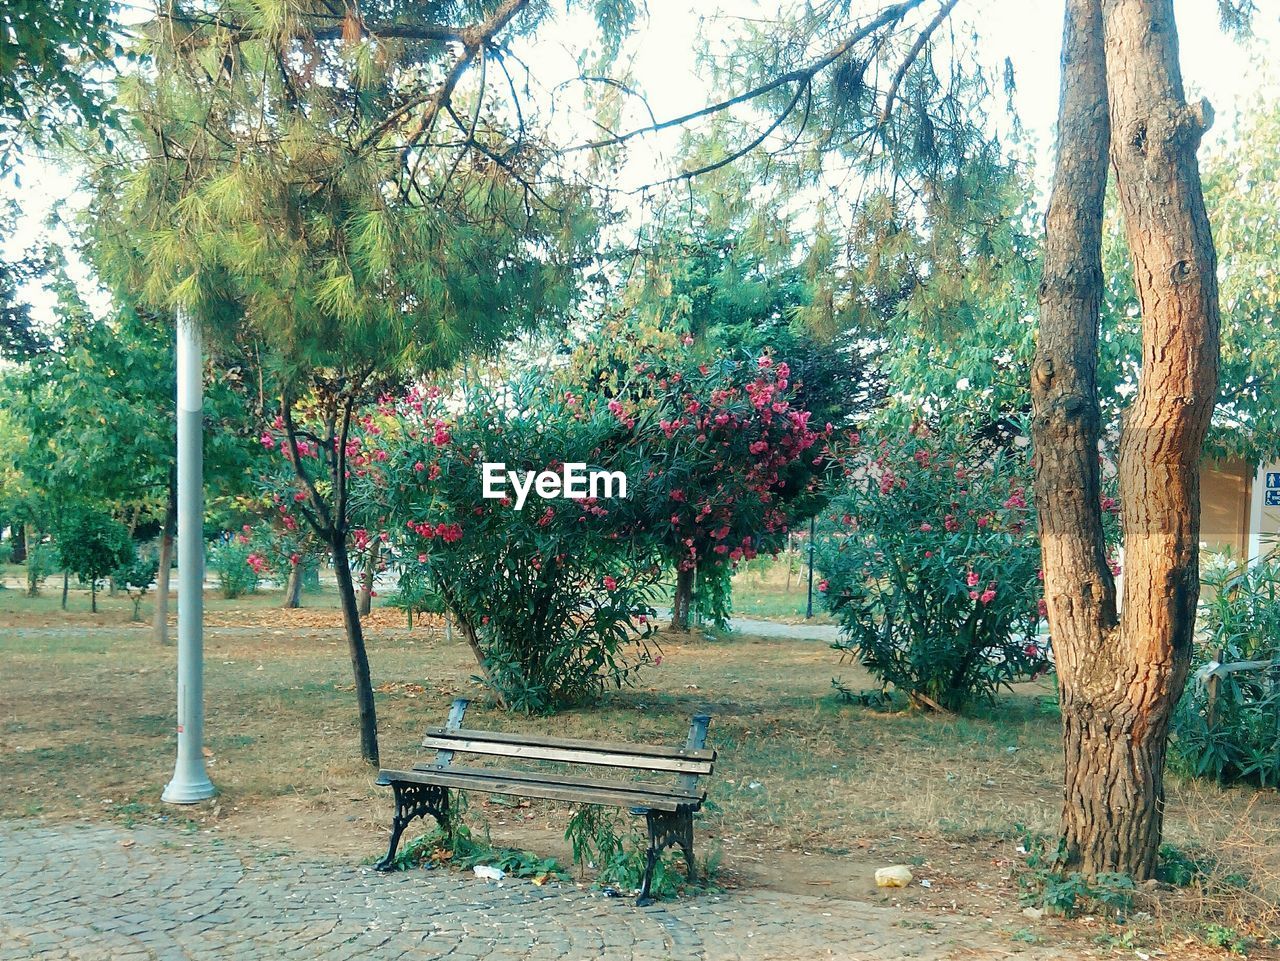 TREES IN PARK